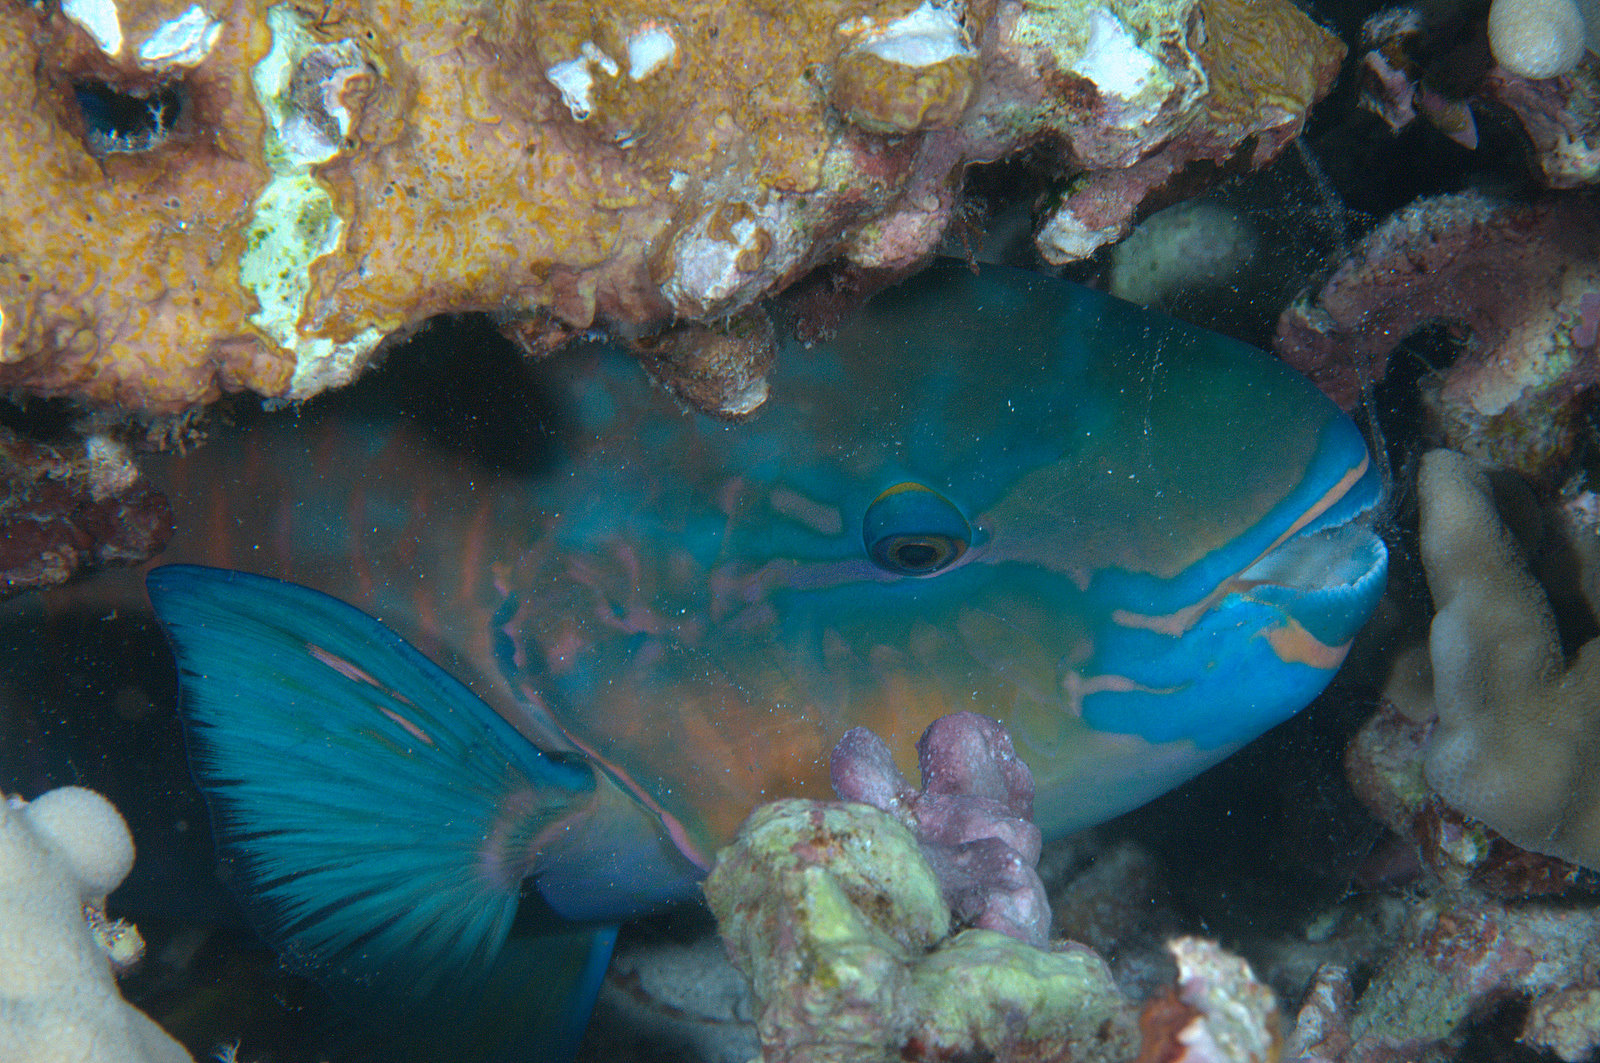 Image of Pacific bullethead parrotfish